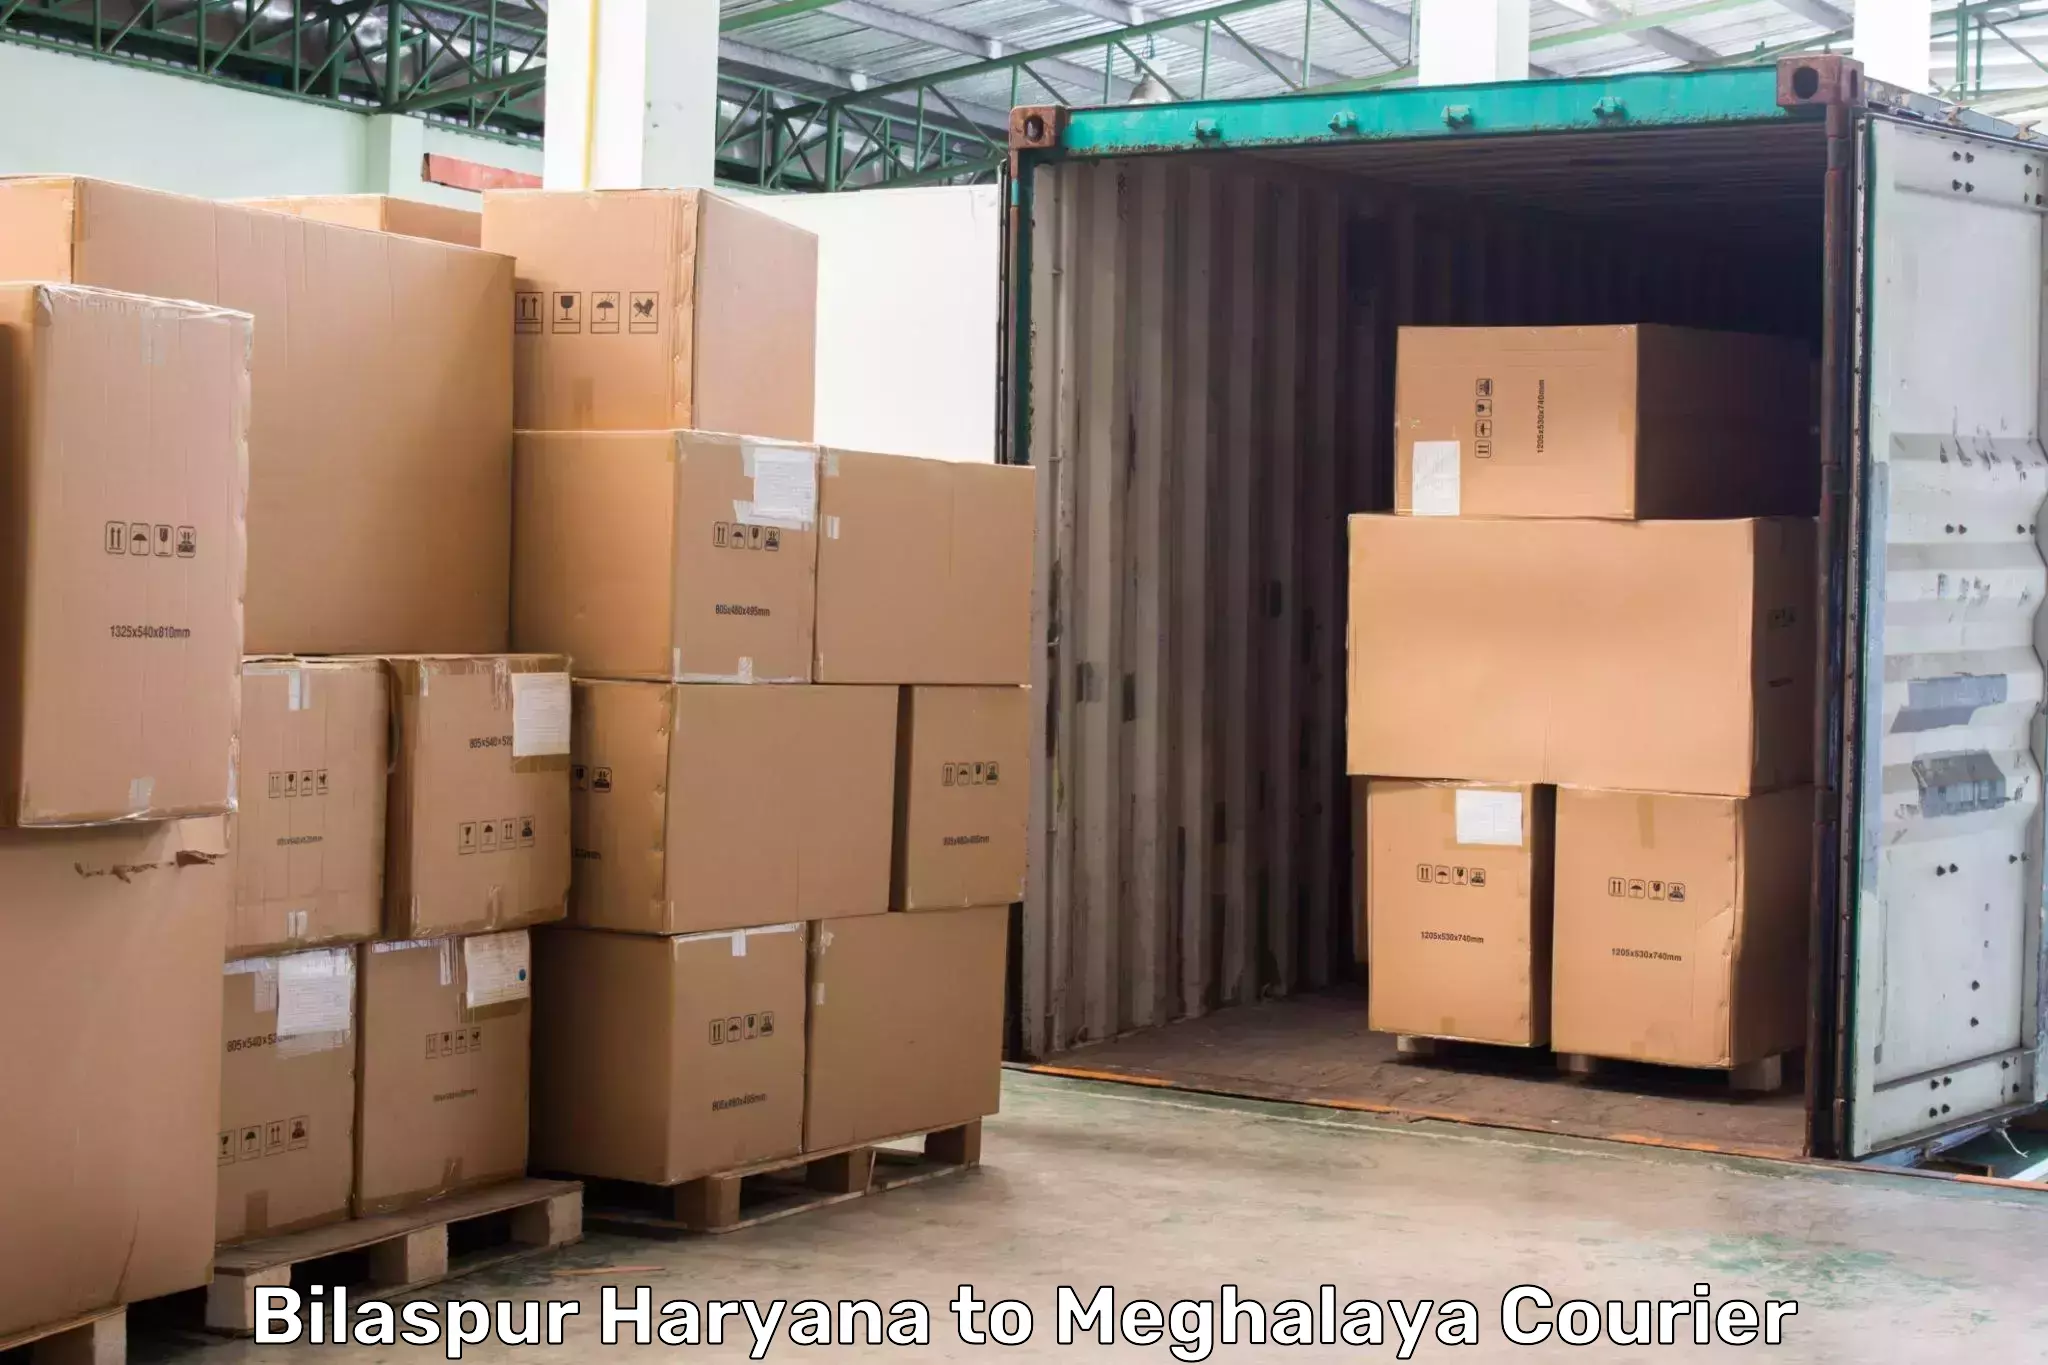 State-of-the-art courier technology Bilaspur Haryana to Meghalaya